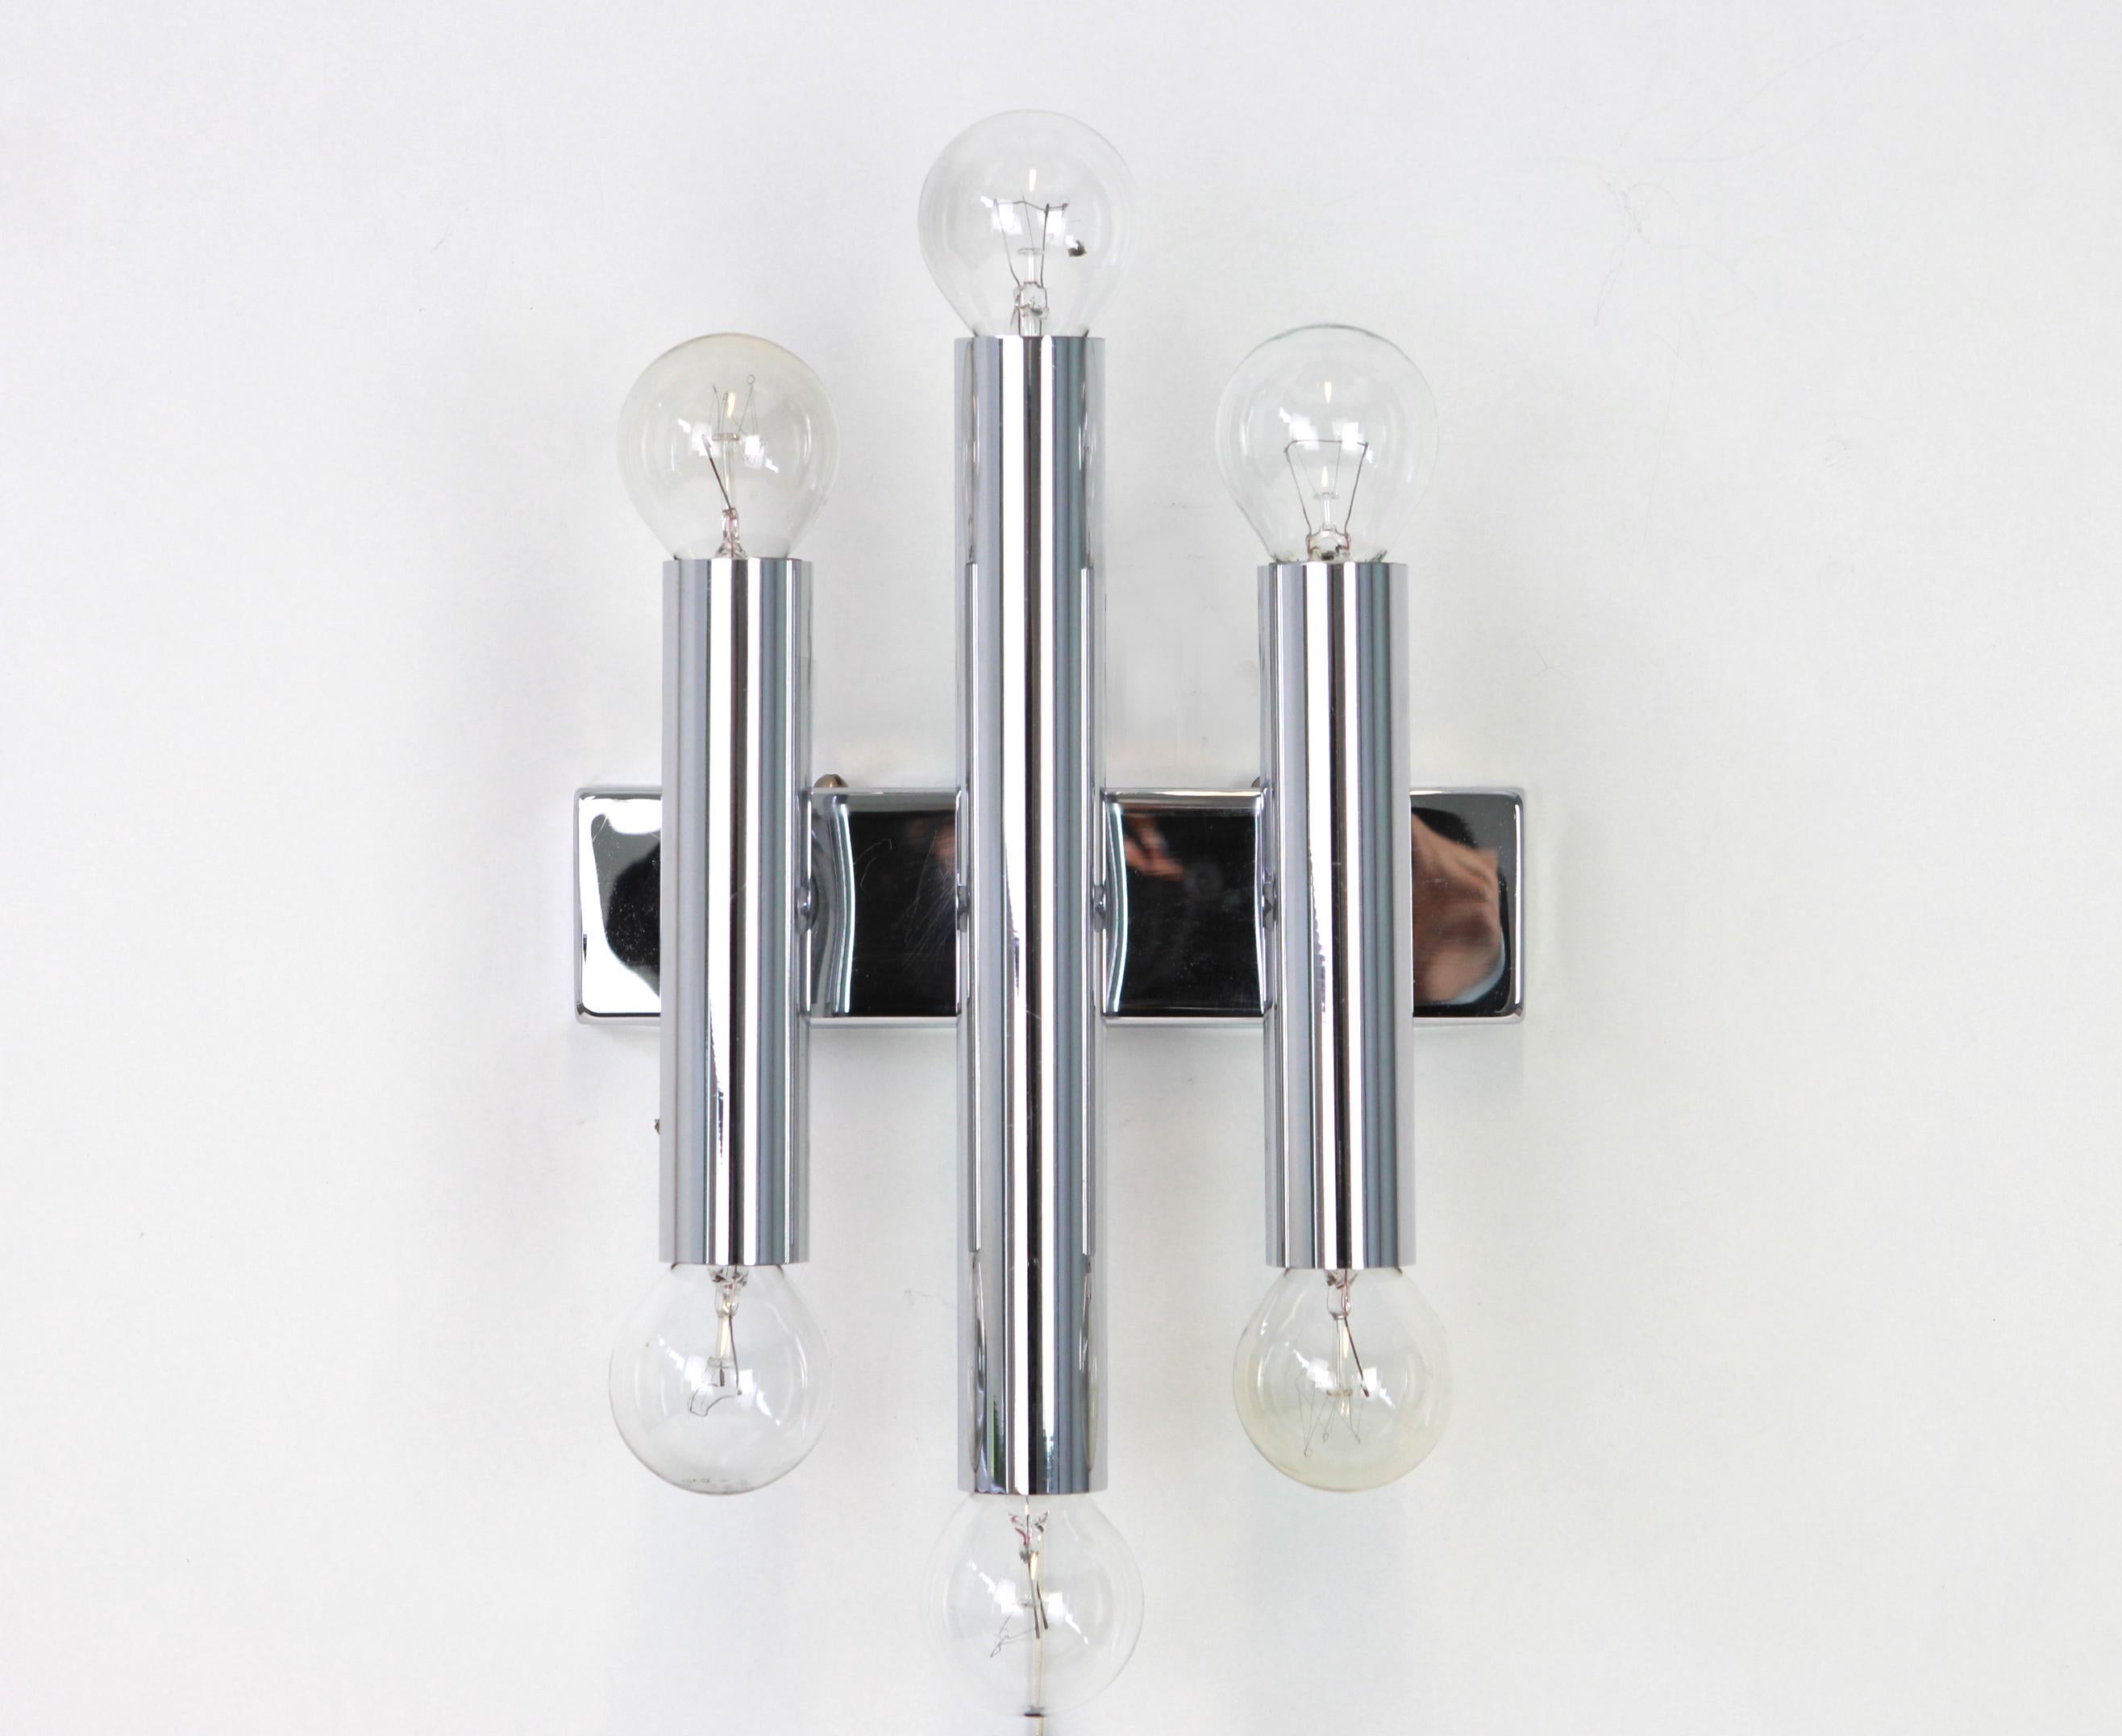 Pair of Italian chrome wall sconces Sciolari style - 1970s
Each wall light needs 6 x E14 small bulb.
Dimensions
Height: approx. 23 cm 
Width: 20 cm
Depth: 10 cm 
Good condition.
Please note that the listed price is for the pair.
   